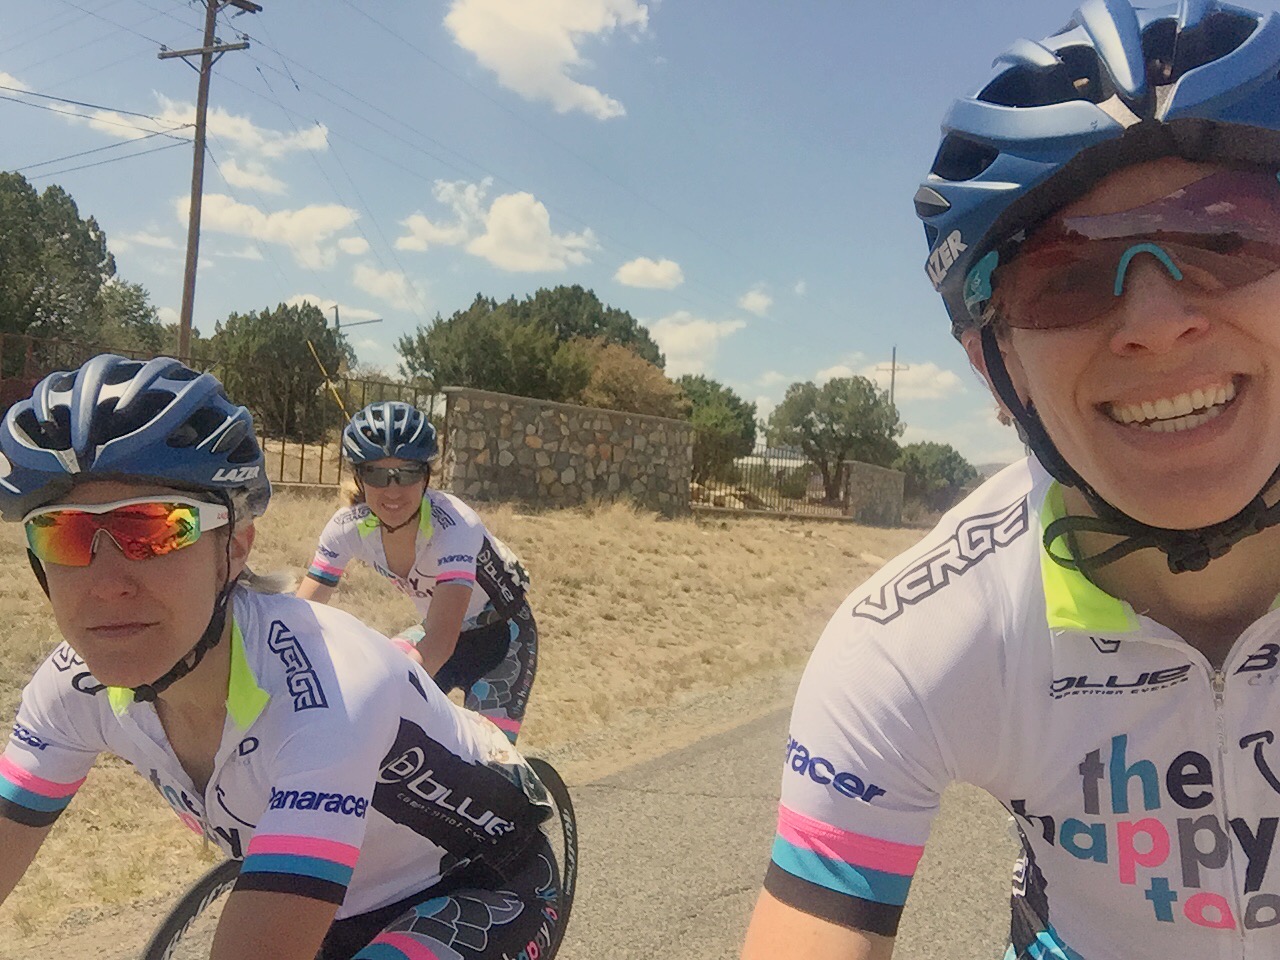 Amy Cameron, Dawn Andres, and Jen Luebke after stage 2